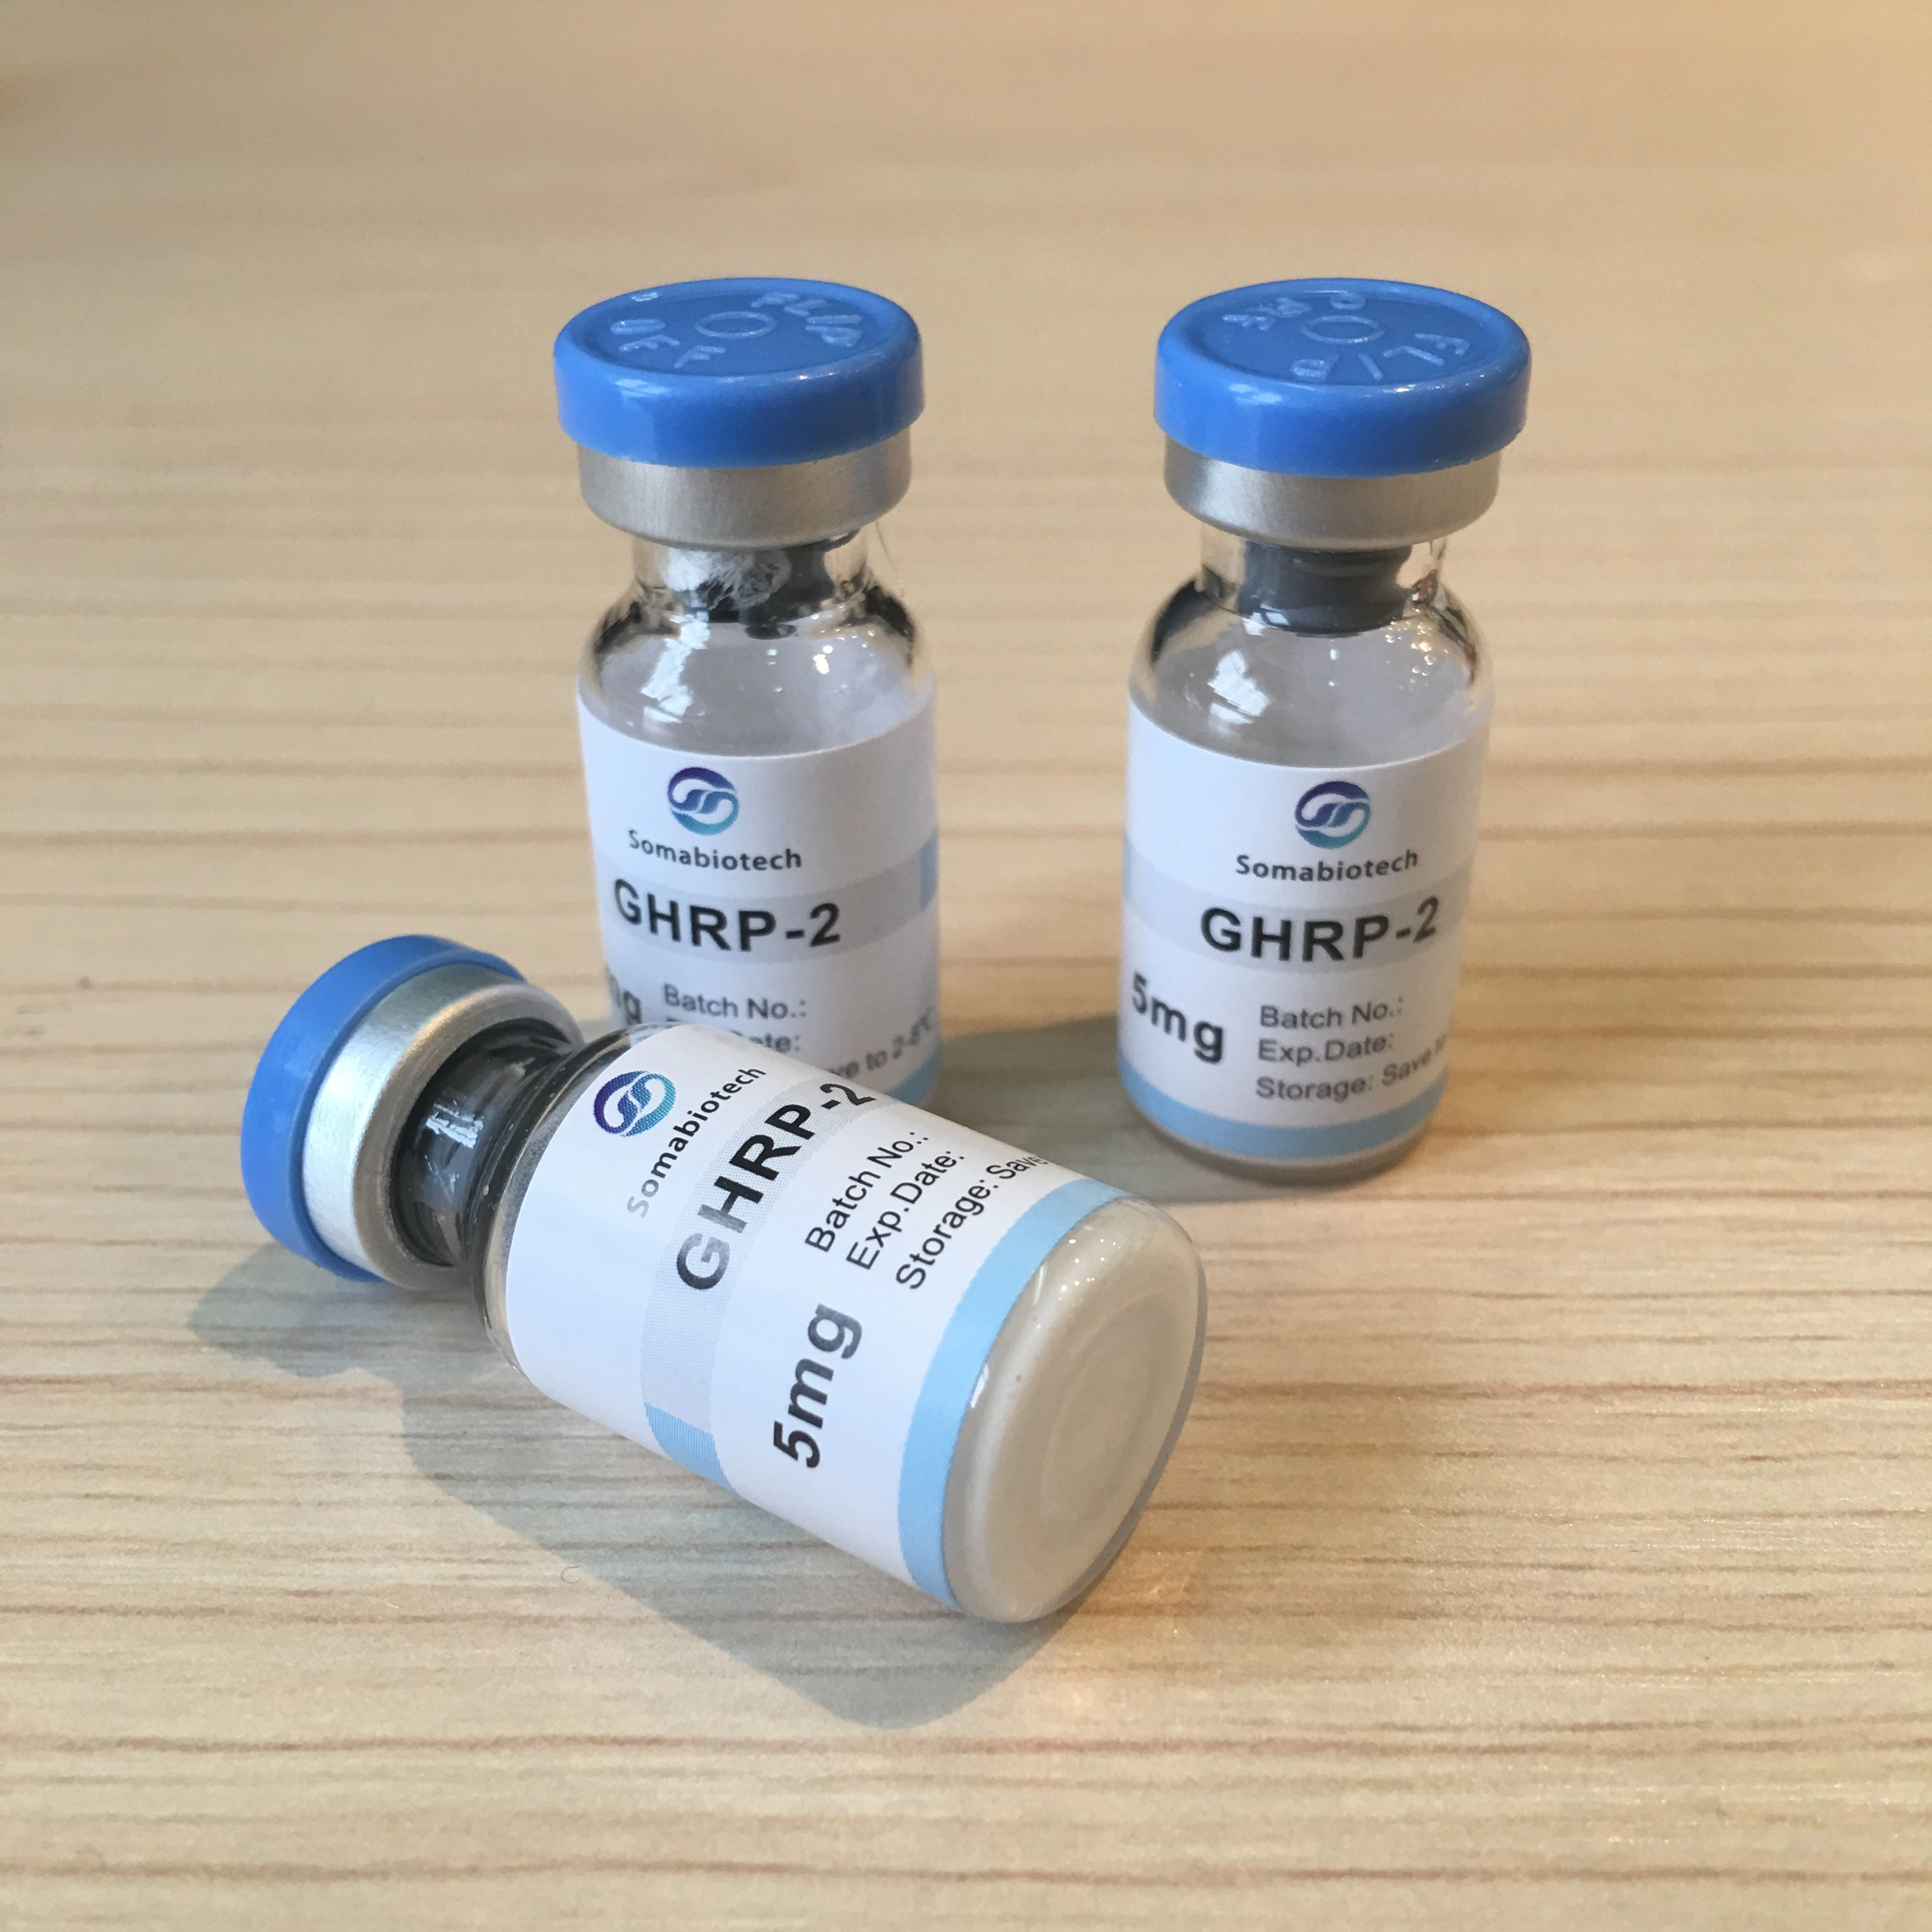 GHRP-2 growth hormone releasing peptide